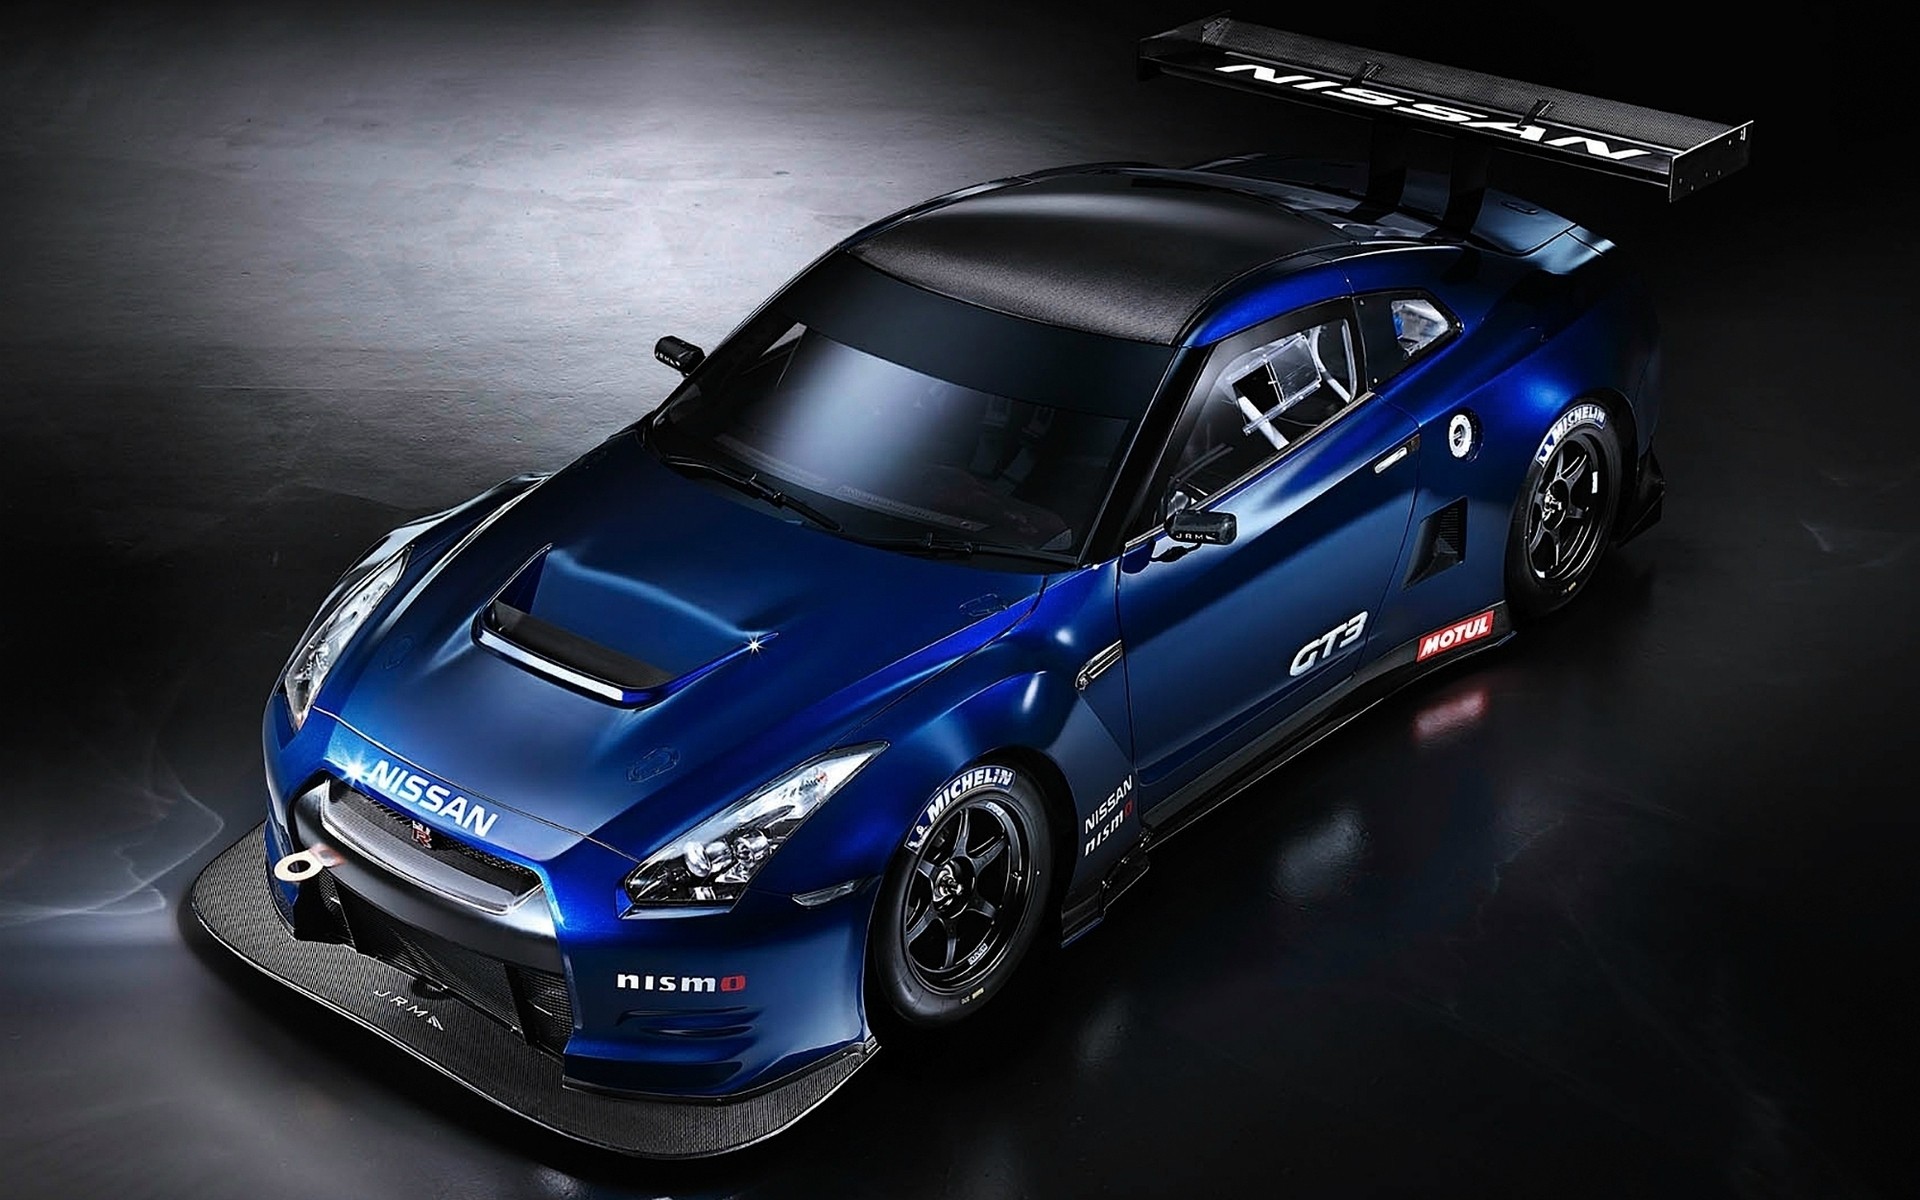 General 1920x1200 Nissan GT-R car Nissan blue cars vehicle bodykit Japanese cars headlights frontal view minimalism simple background